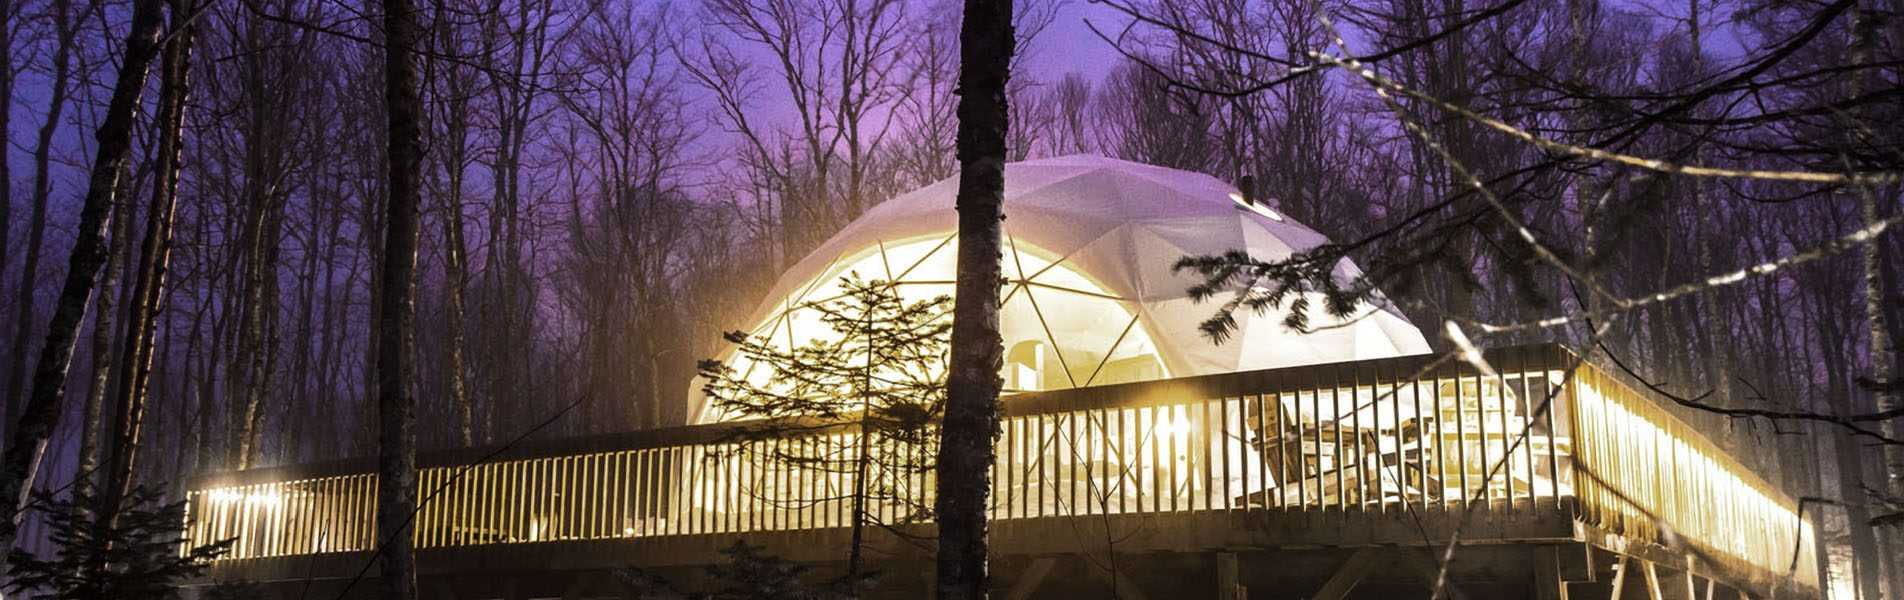 Glamping Domes - Pacific Domes